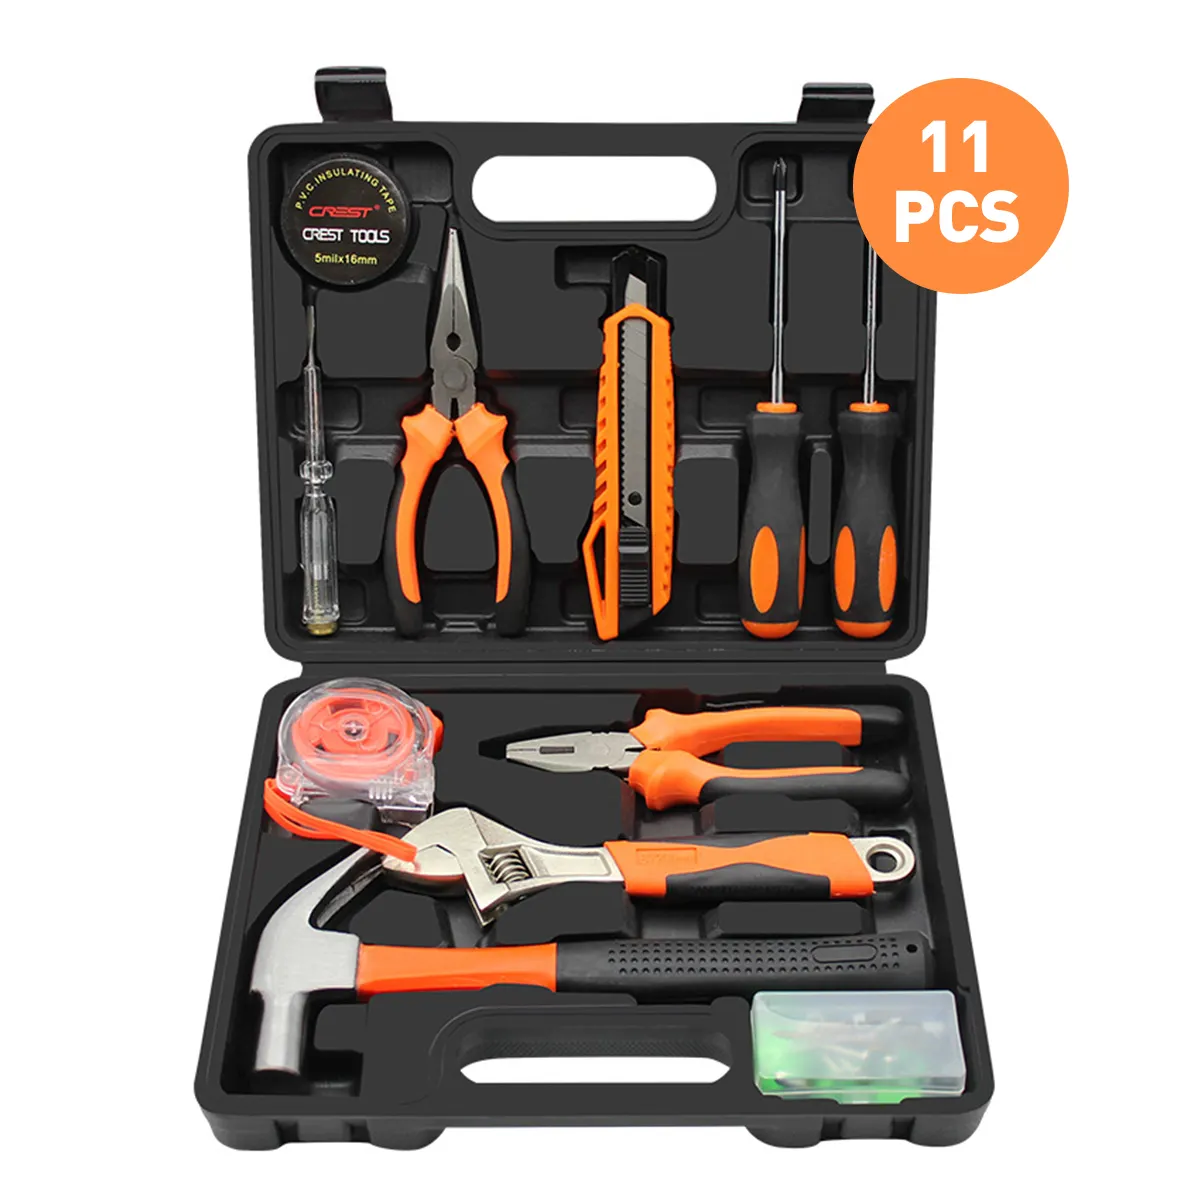 11pcs Hot Sell High Quality Furniture Repair Hand Tools Set Kit with Case